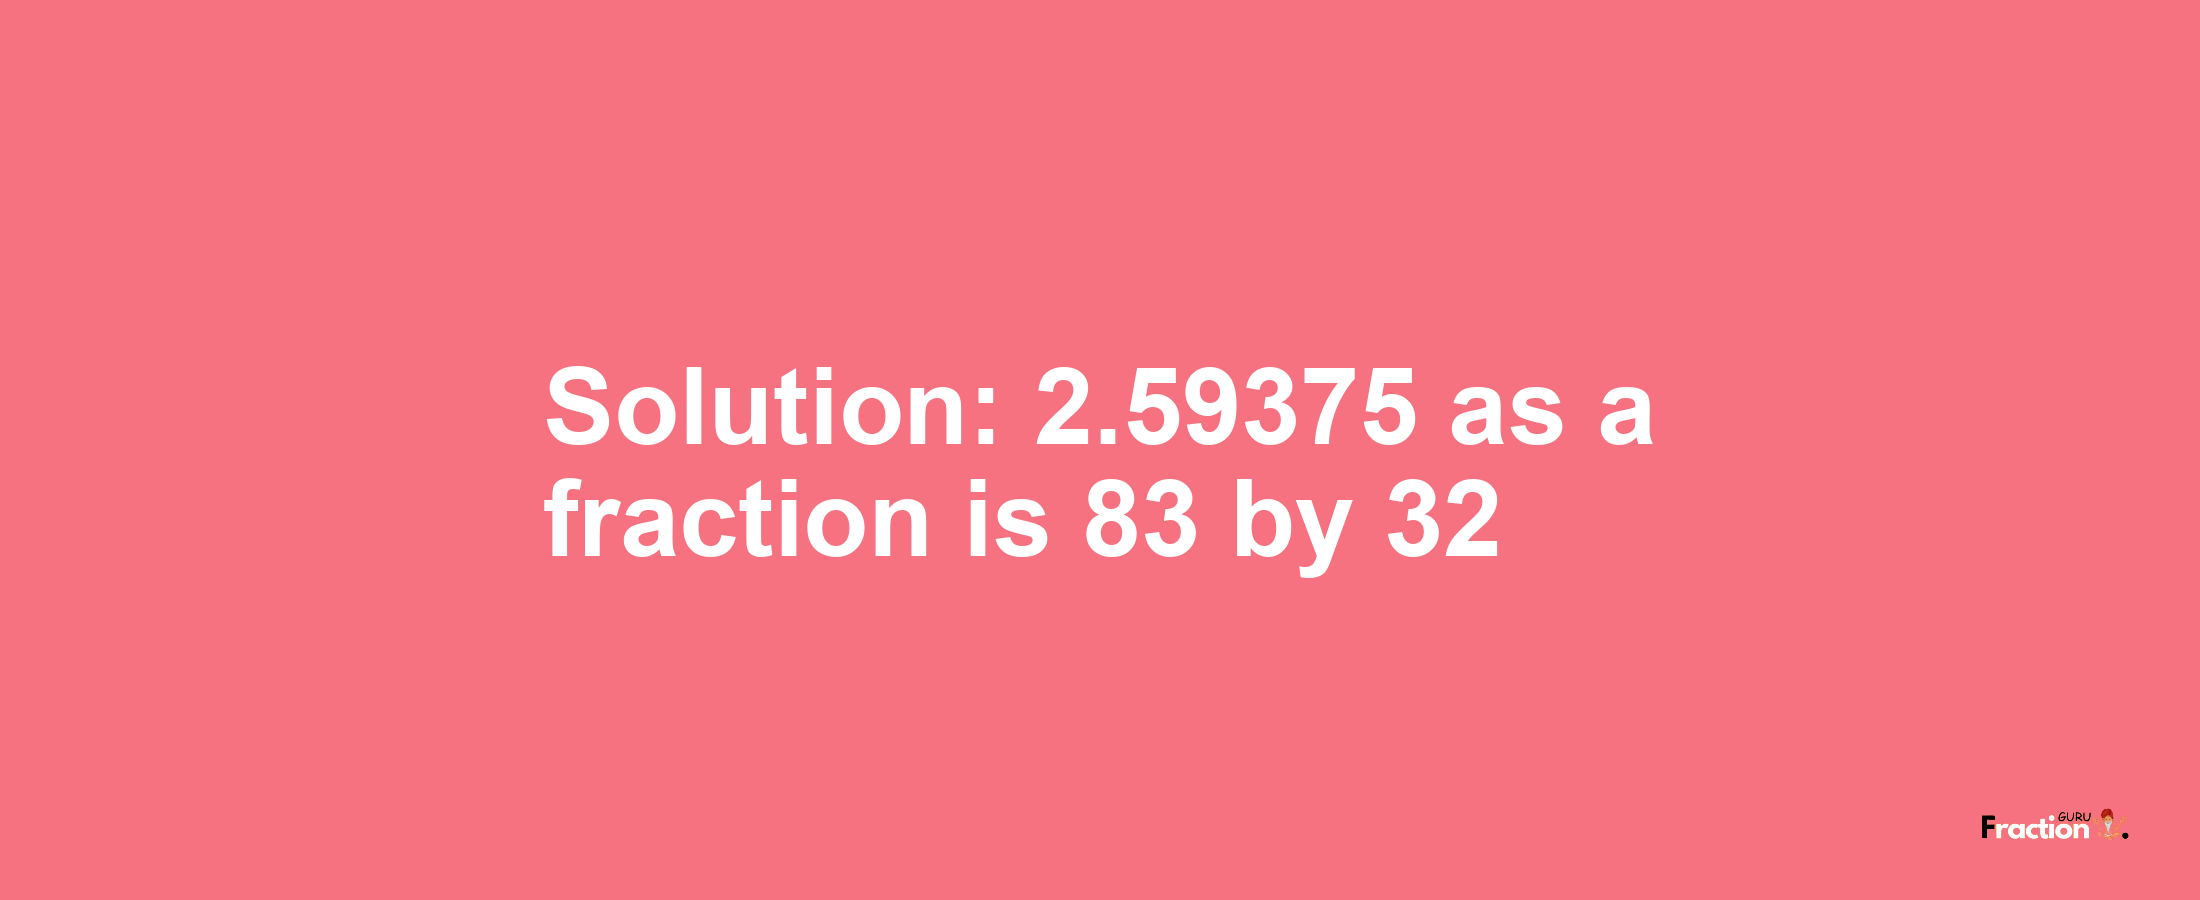 Solution:2.59375 as a fraction is 83/32